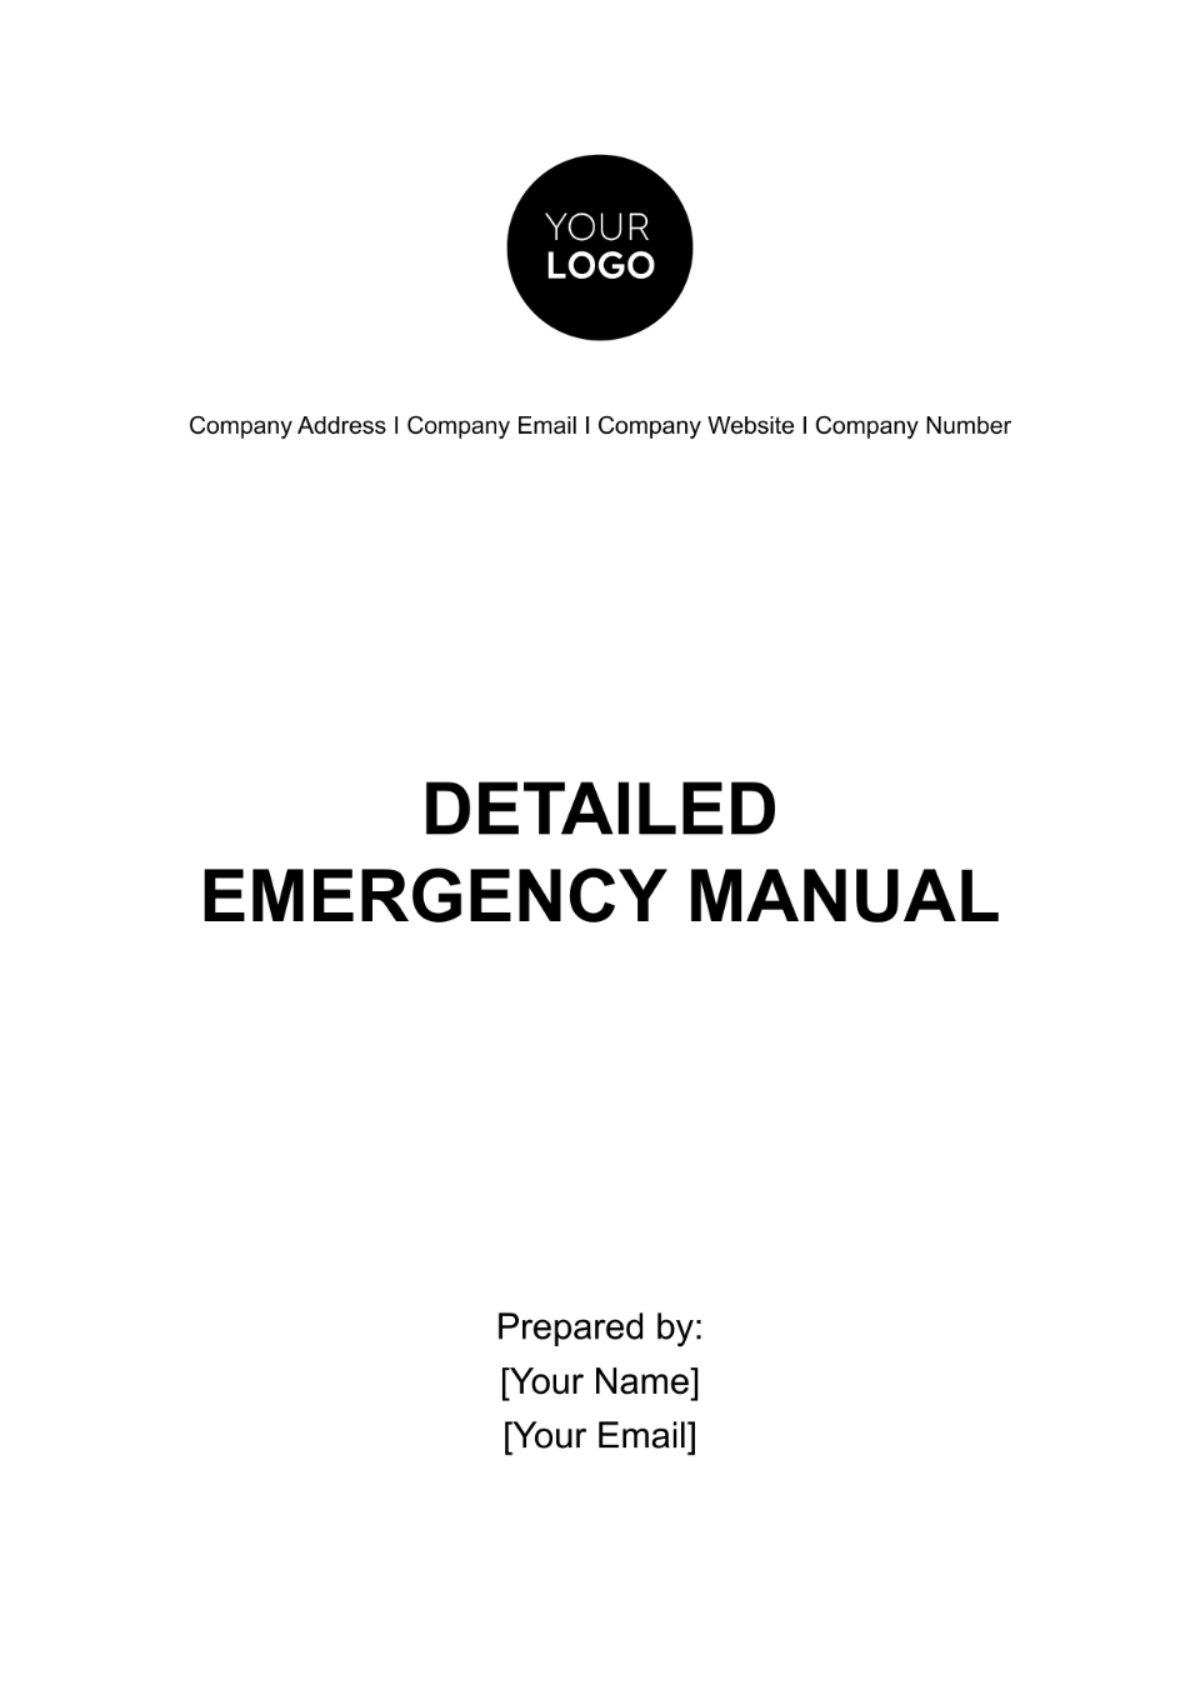 Detailed Emergency Manual Template